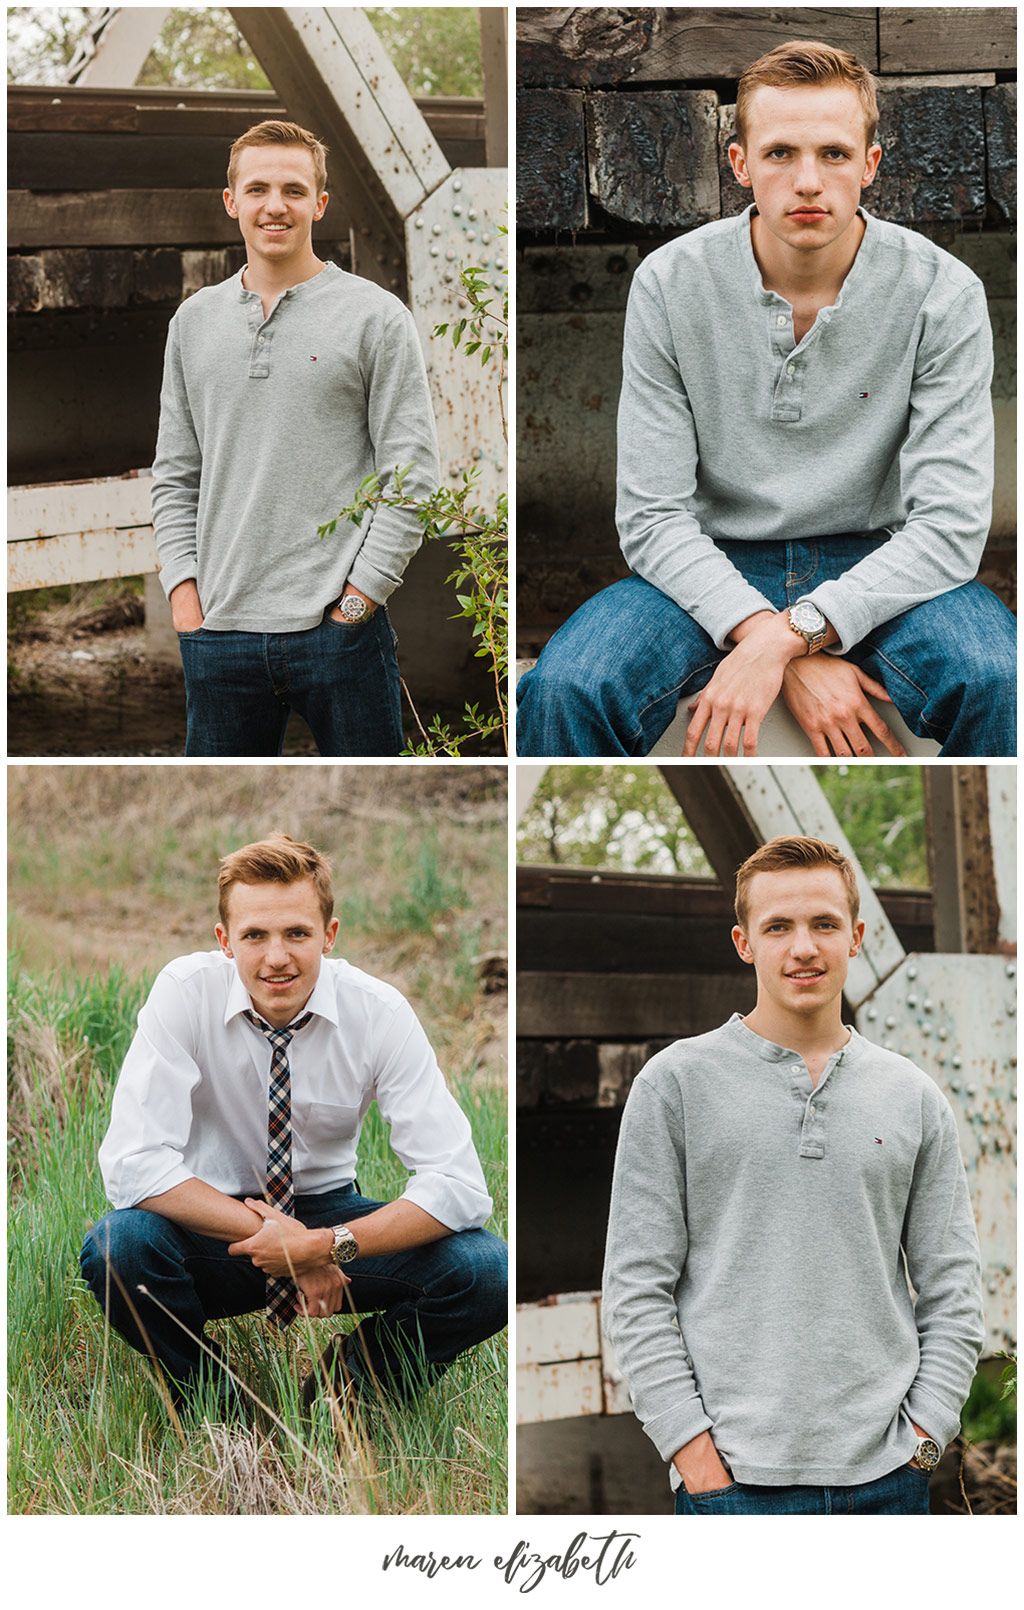 Since missionaries for the Church of Jesus Christ of Latter-day Saints can now serve when 18 I take a lot of Senior & Missionary pictures during the same session! Missionaries teach fundamental gospel truths that can change your life when you learn with real intent and put them to the test in your life. Find out more at Mormon.org. | Arizona Senior Photographer | Arizona Missionary Photographer | Maren Elizabeth Photography